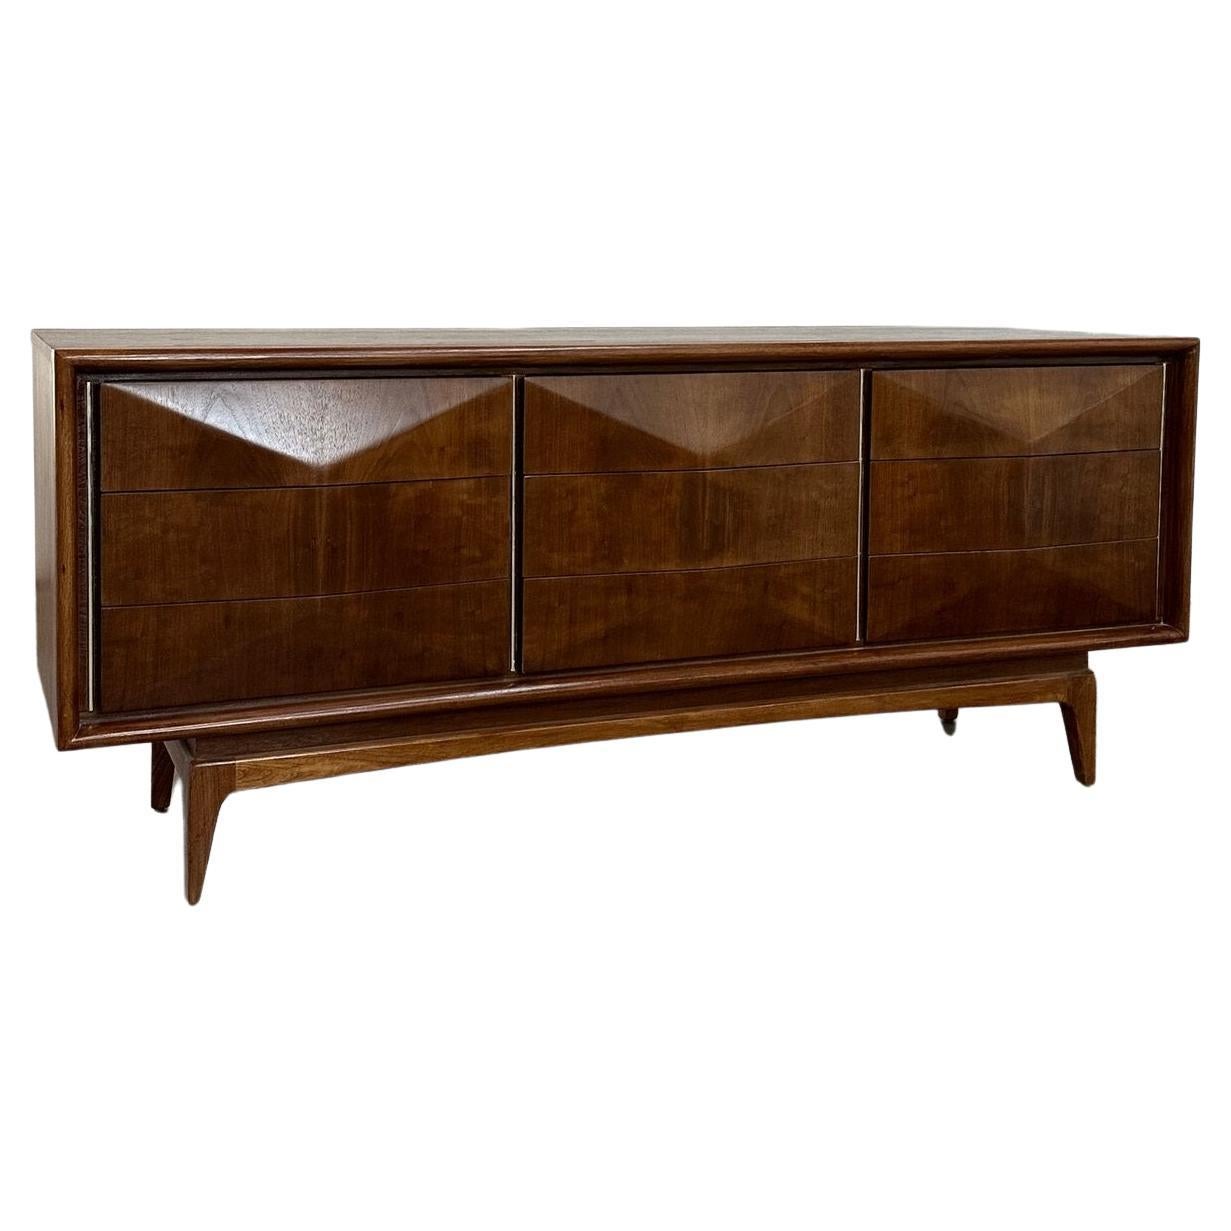 Diamond dresser by United Furniture For Sale